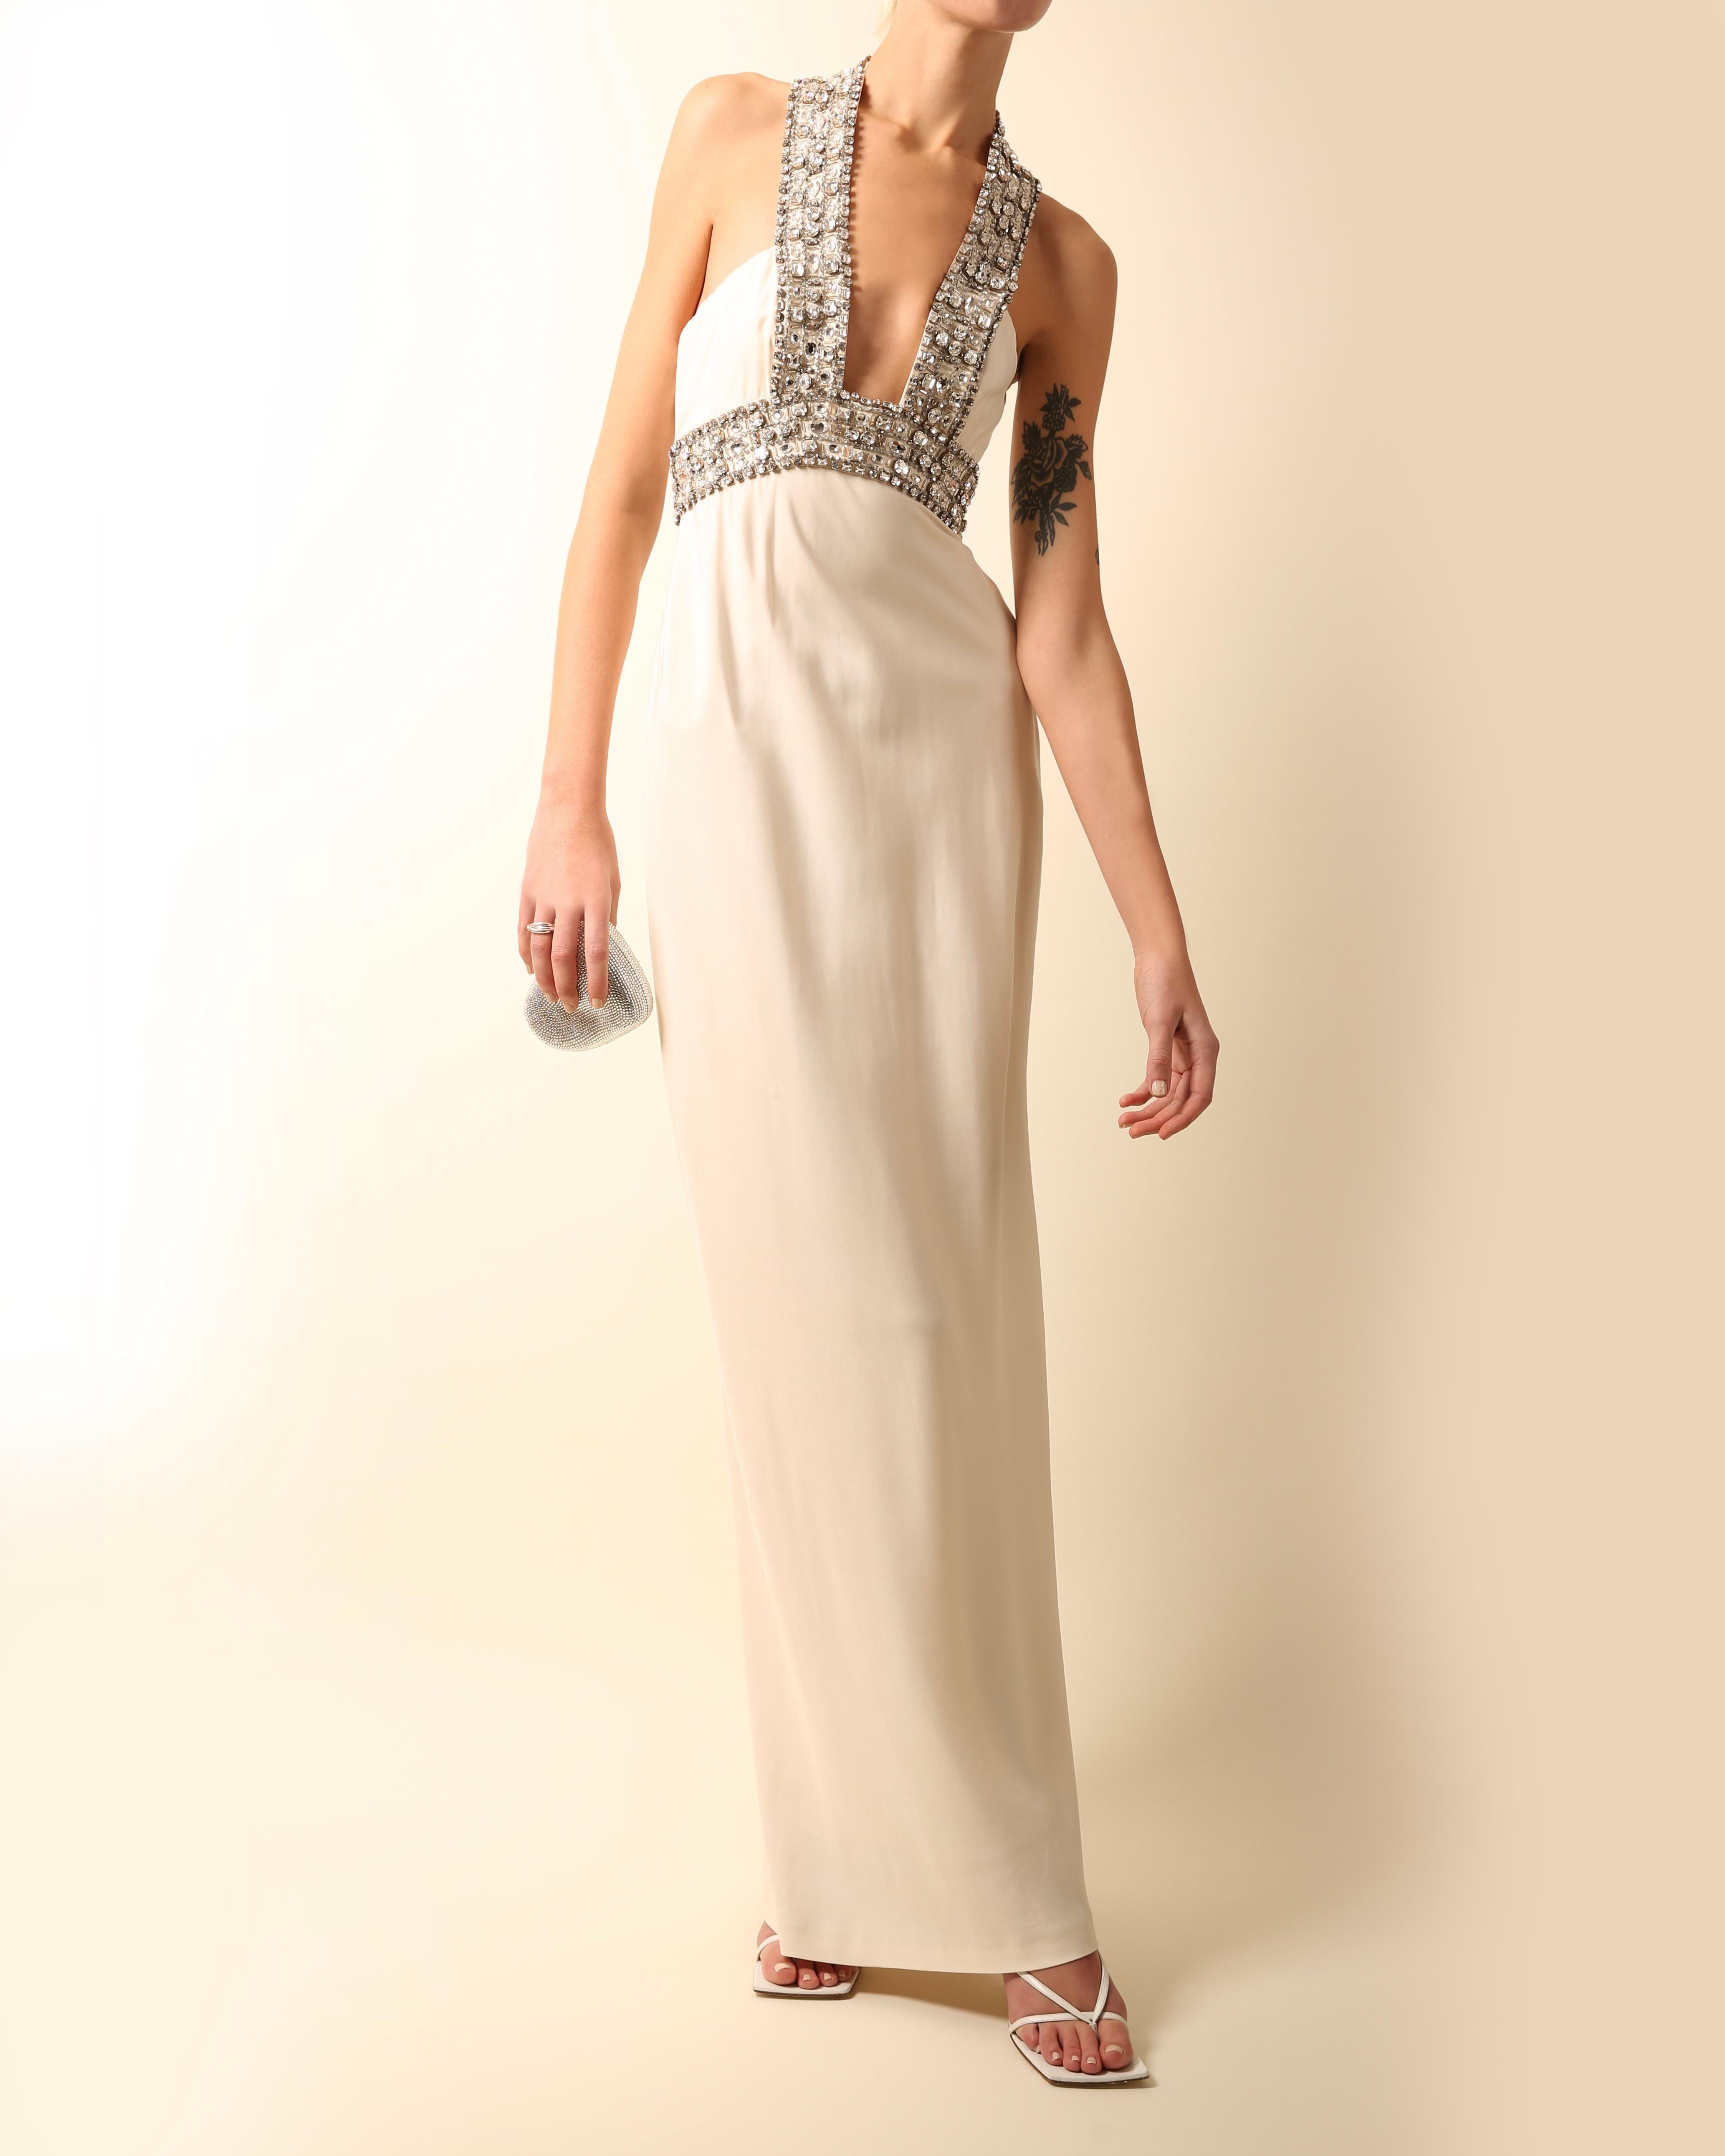 White Azzaro white ivory crystal embellished low cut out halter neck dress gown 36